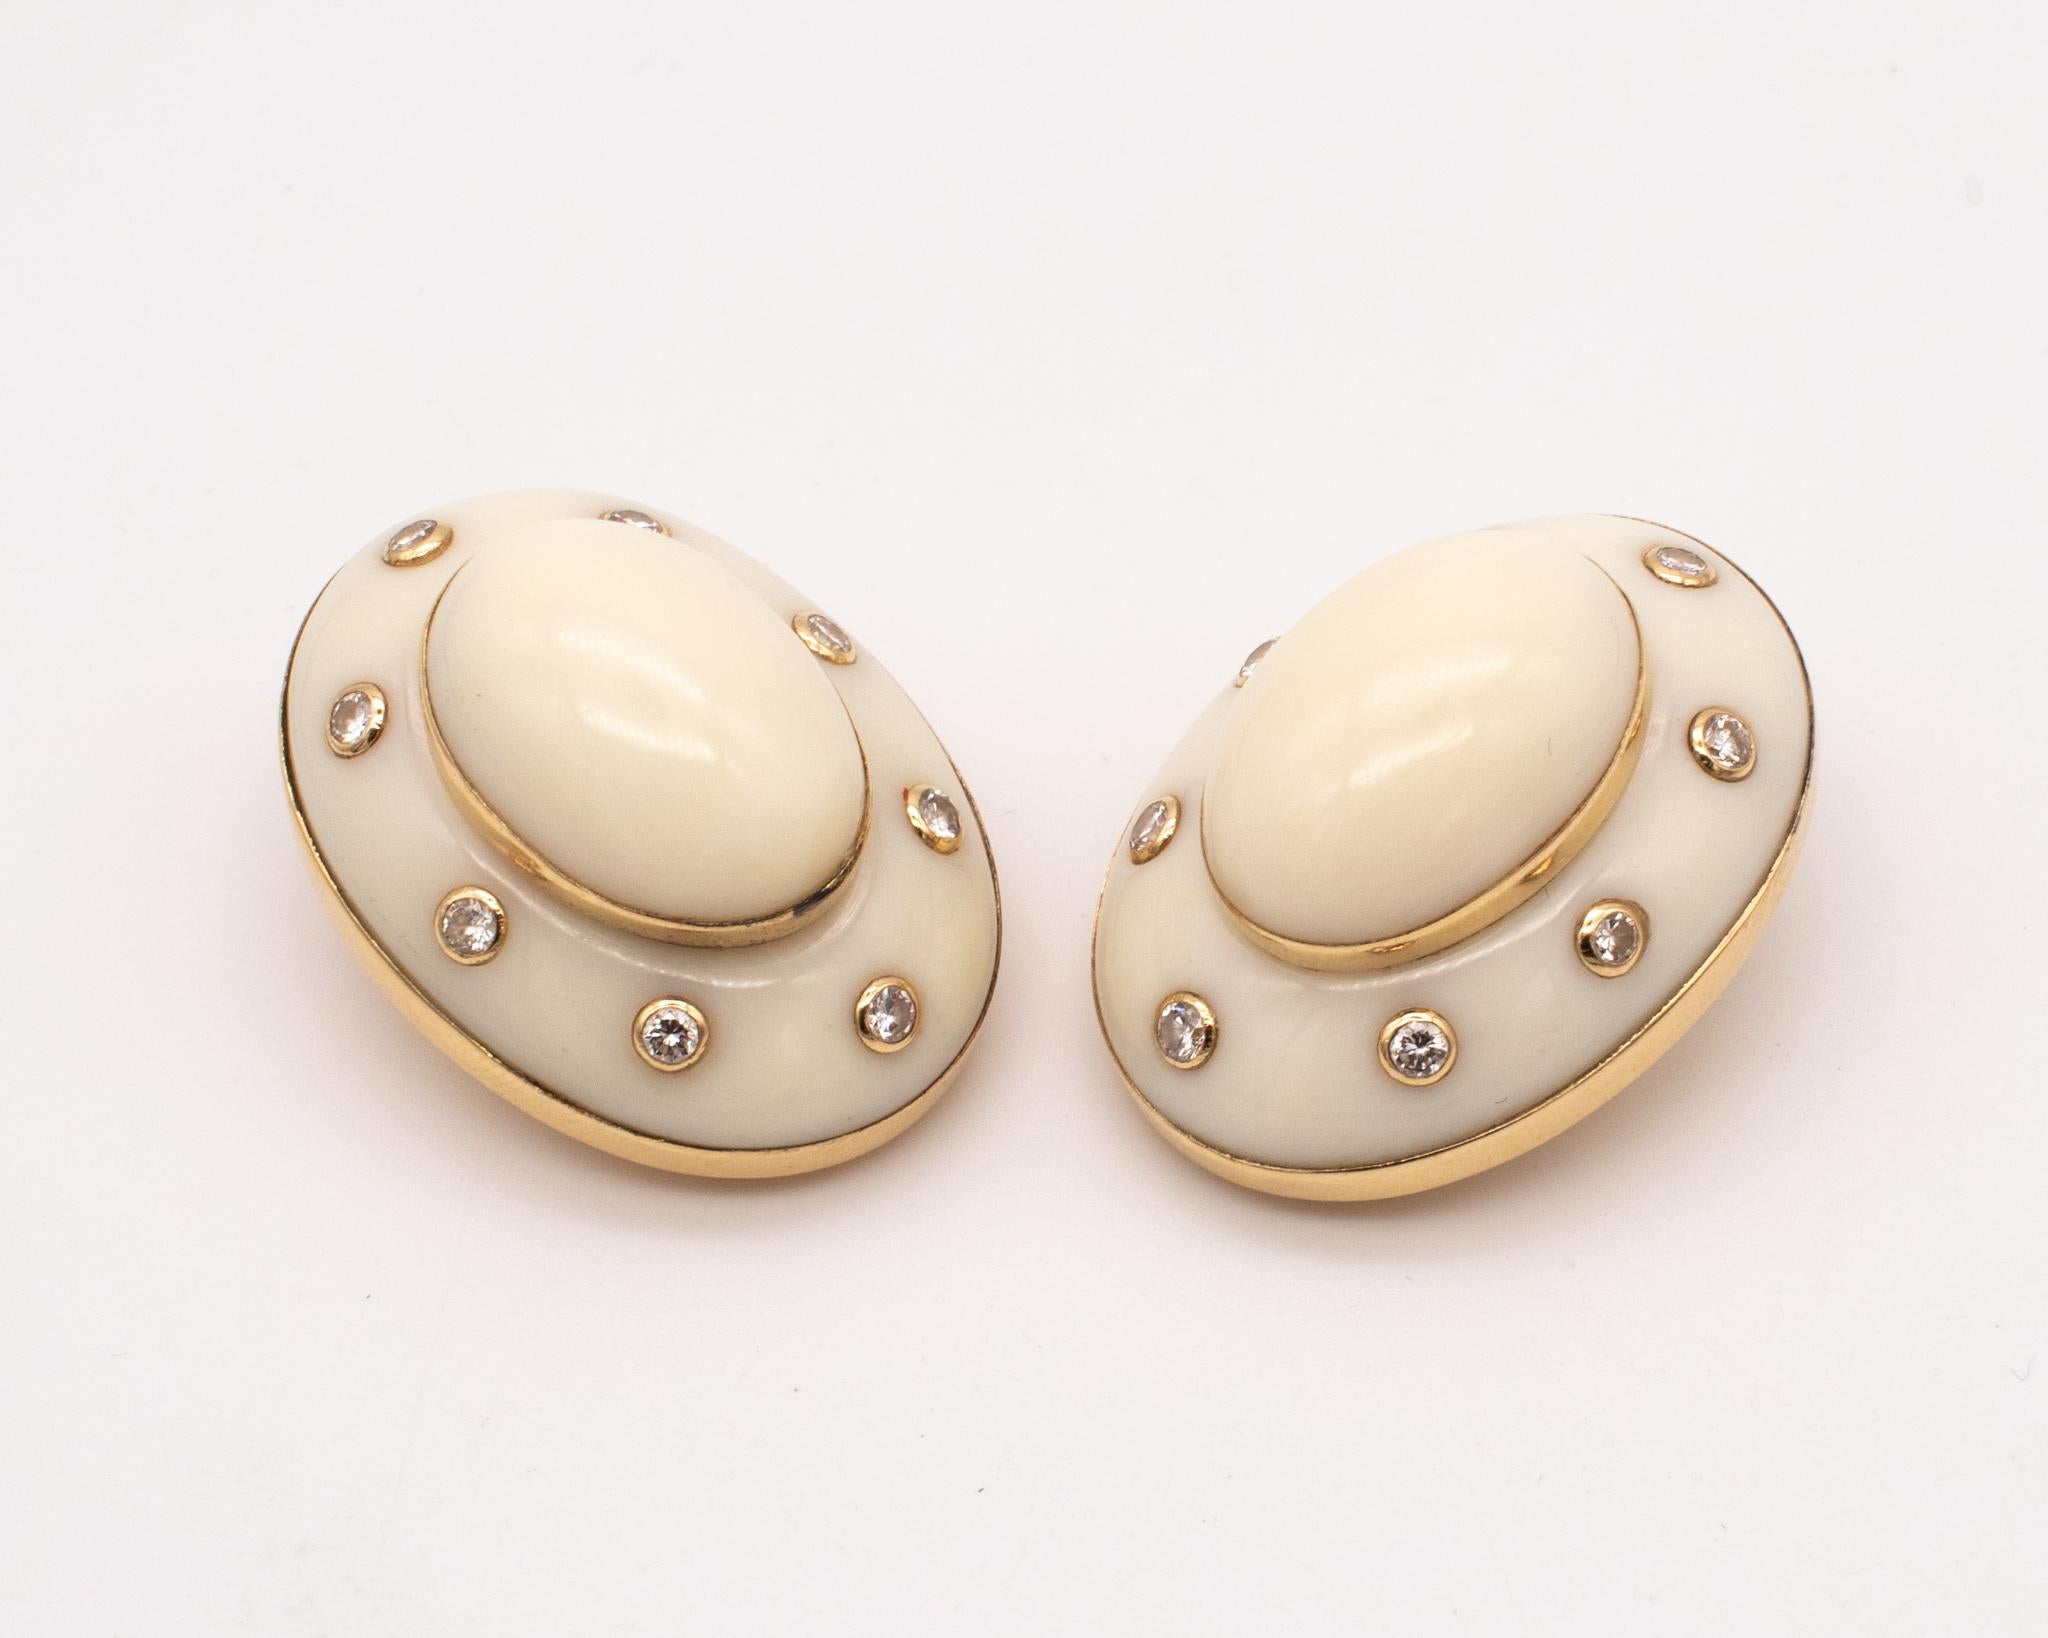 Mixed Cut Seaman Schepps 1970 Trianon 18Kt Yellow Gold Ear Clips with Diamonds and Coral